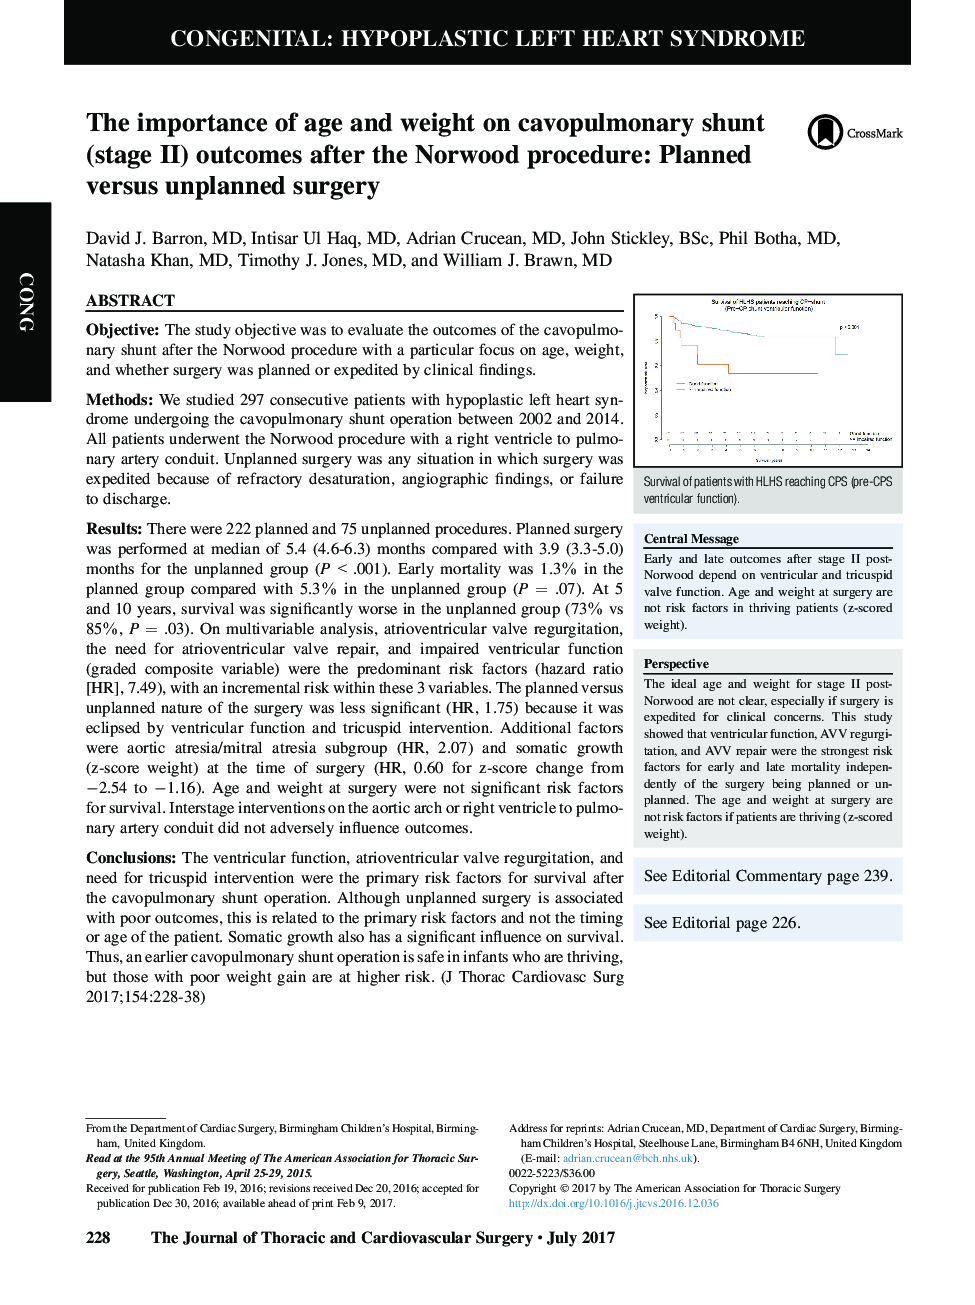 The importance of age and weight on cavopulmonary shunt (stage II) outcomes after the Norwood procedure: Planned versus unplanned surgery